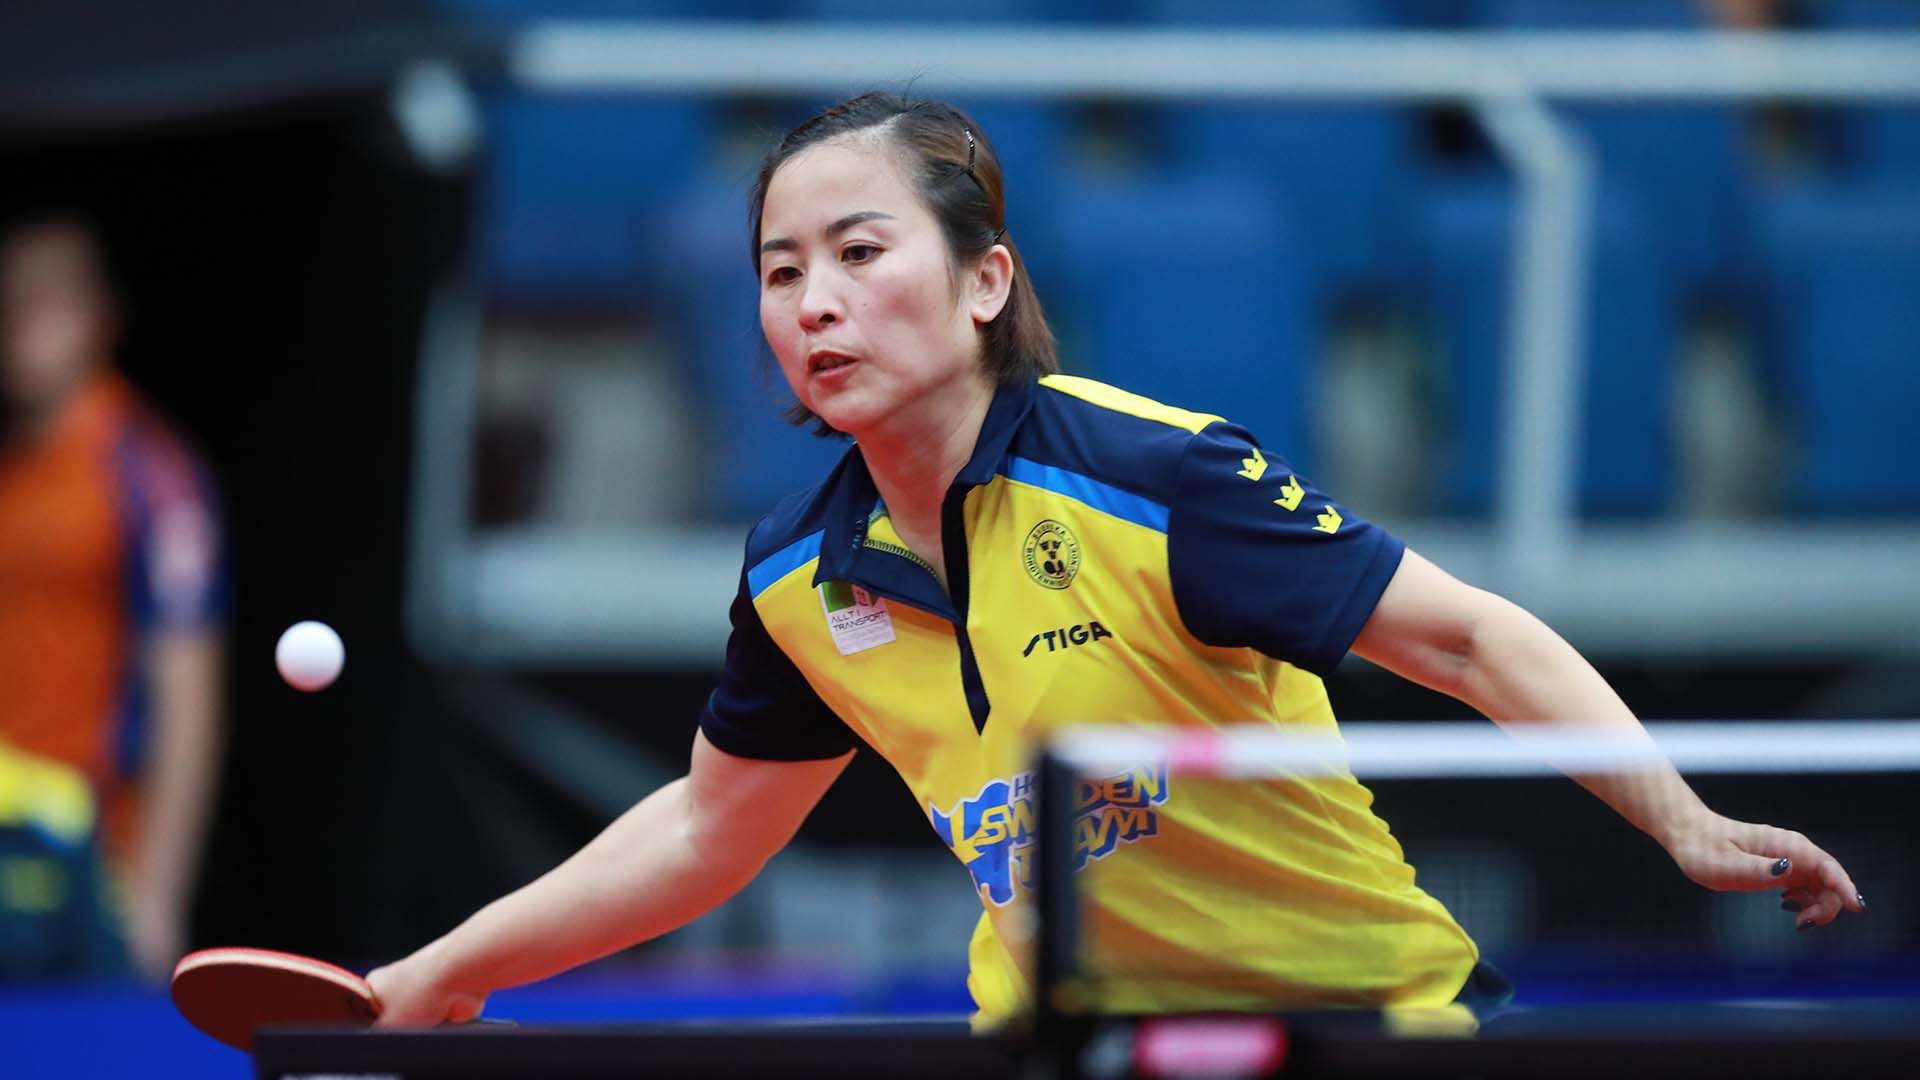 Past winners through to main draw of women's singles event at European Table Tennis Championships